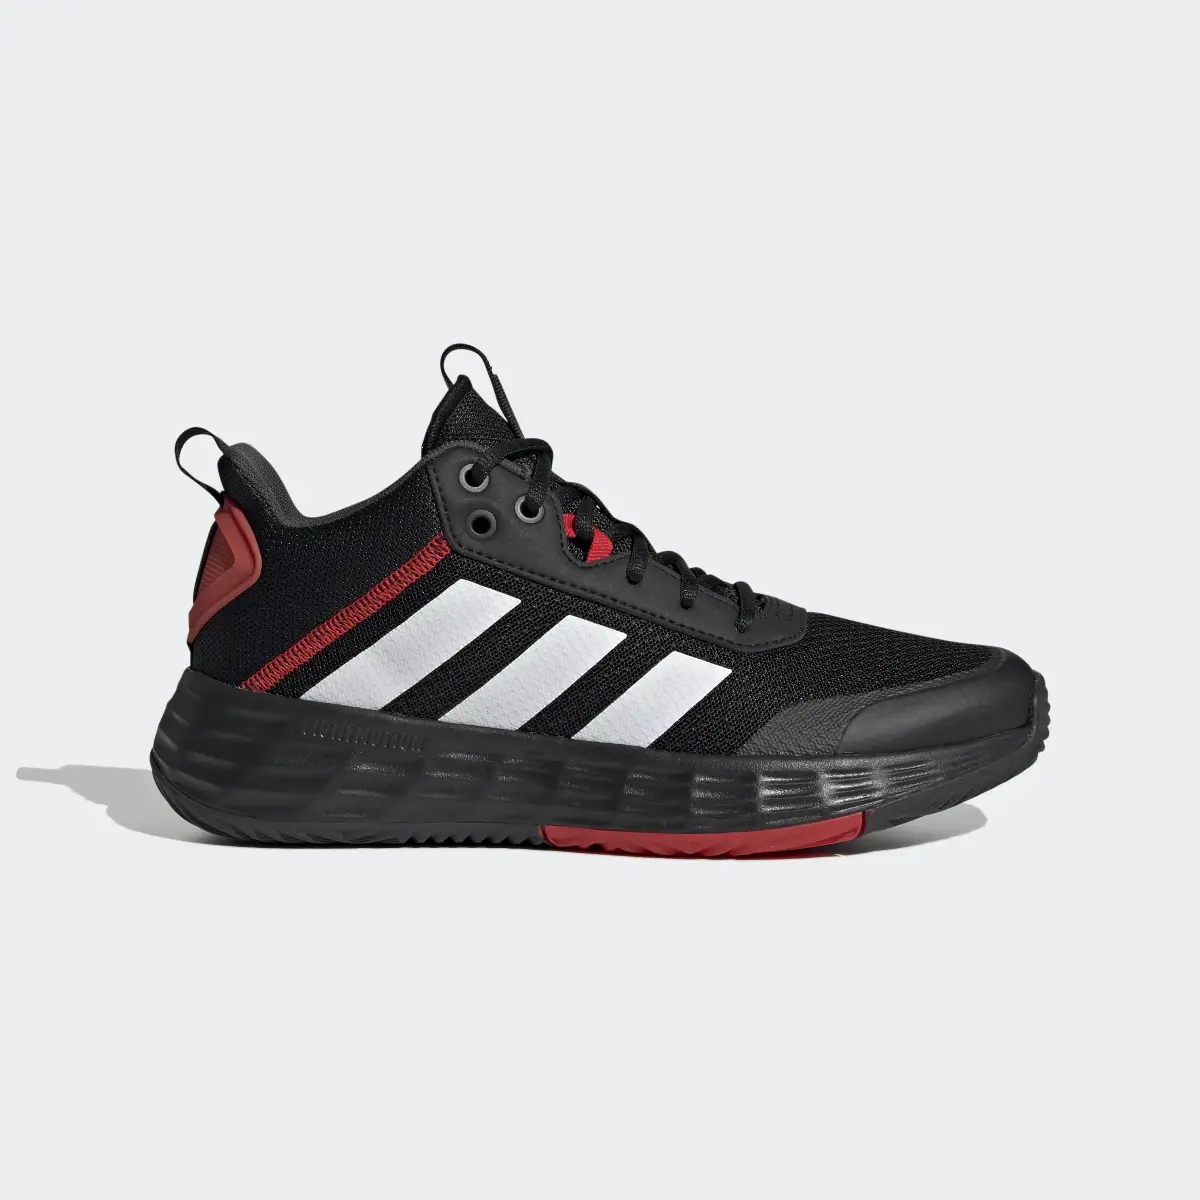 Adidas Chaussure Ownthegame. 2